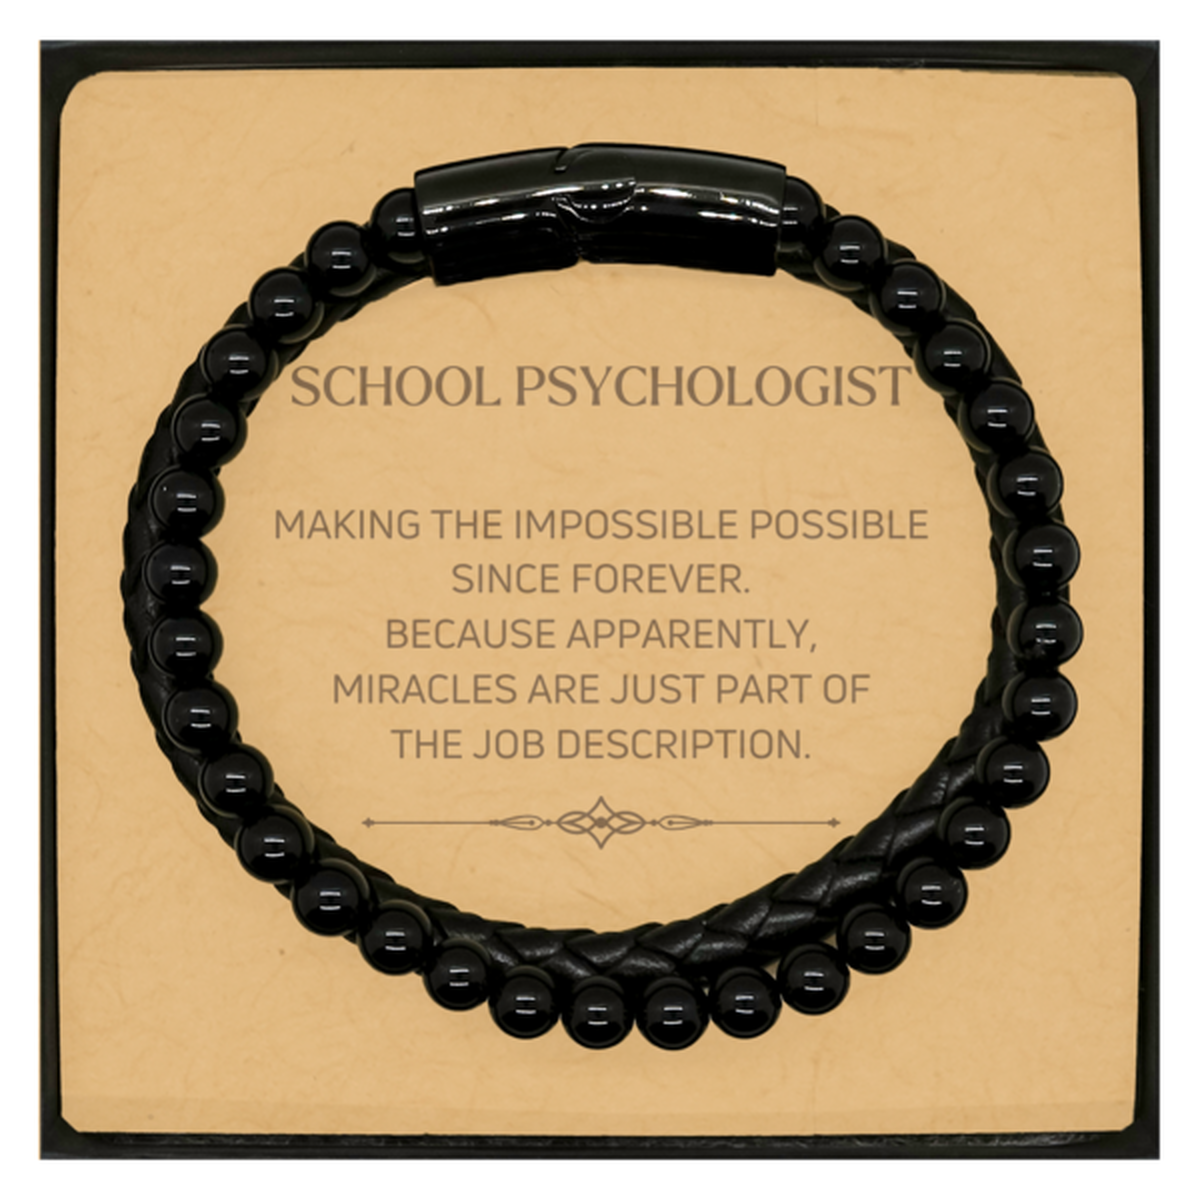 Funny School Psychologist Gifts, Miracles are just part of the job description, Inspirational Birthday Christmas Stone Leather Bracelets For School Psychologist, Men, Women, Coworkers, Friends, Boss